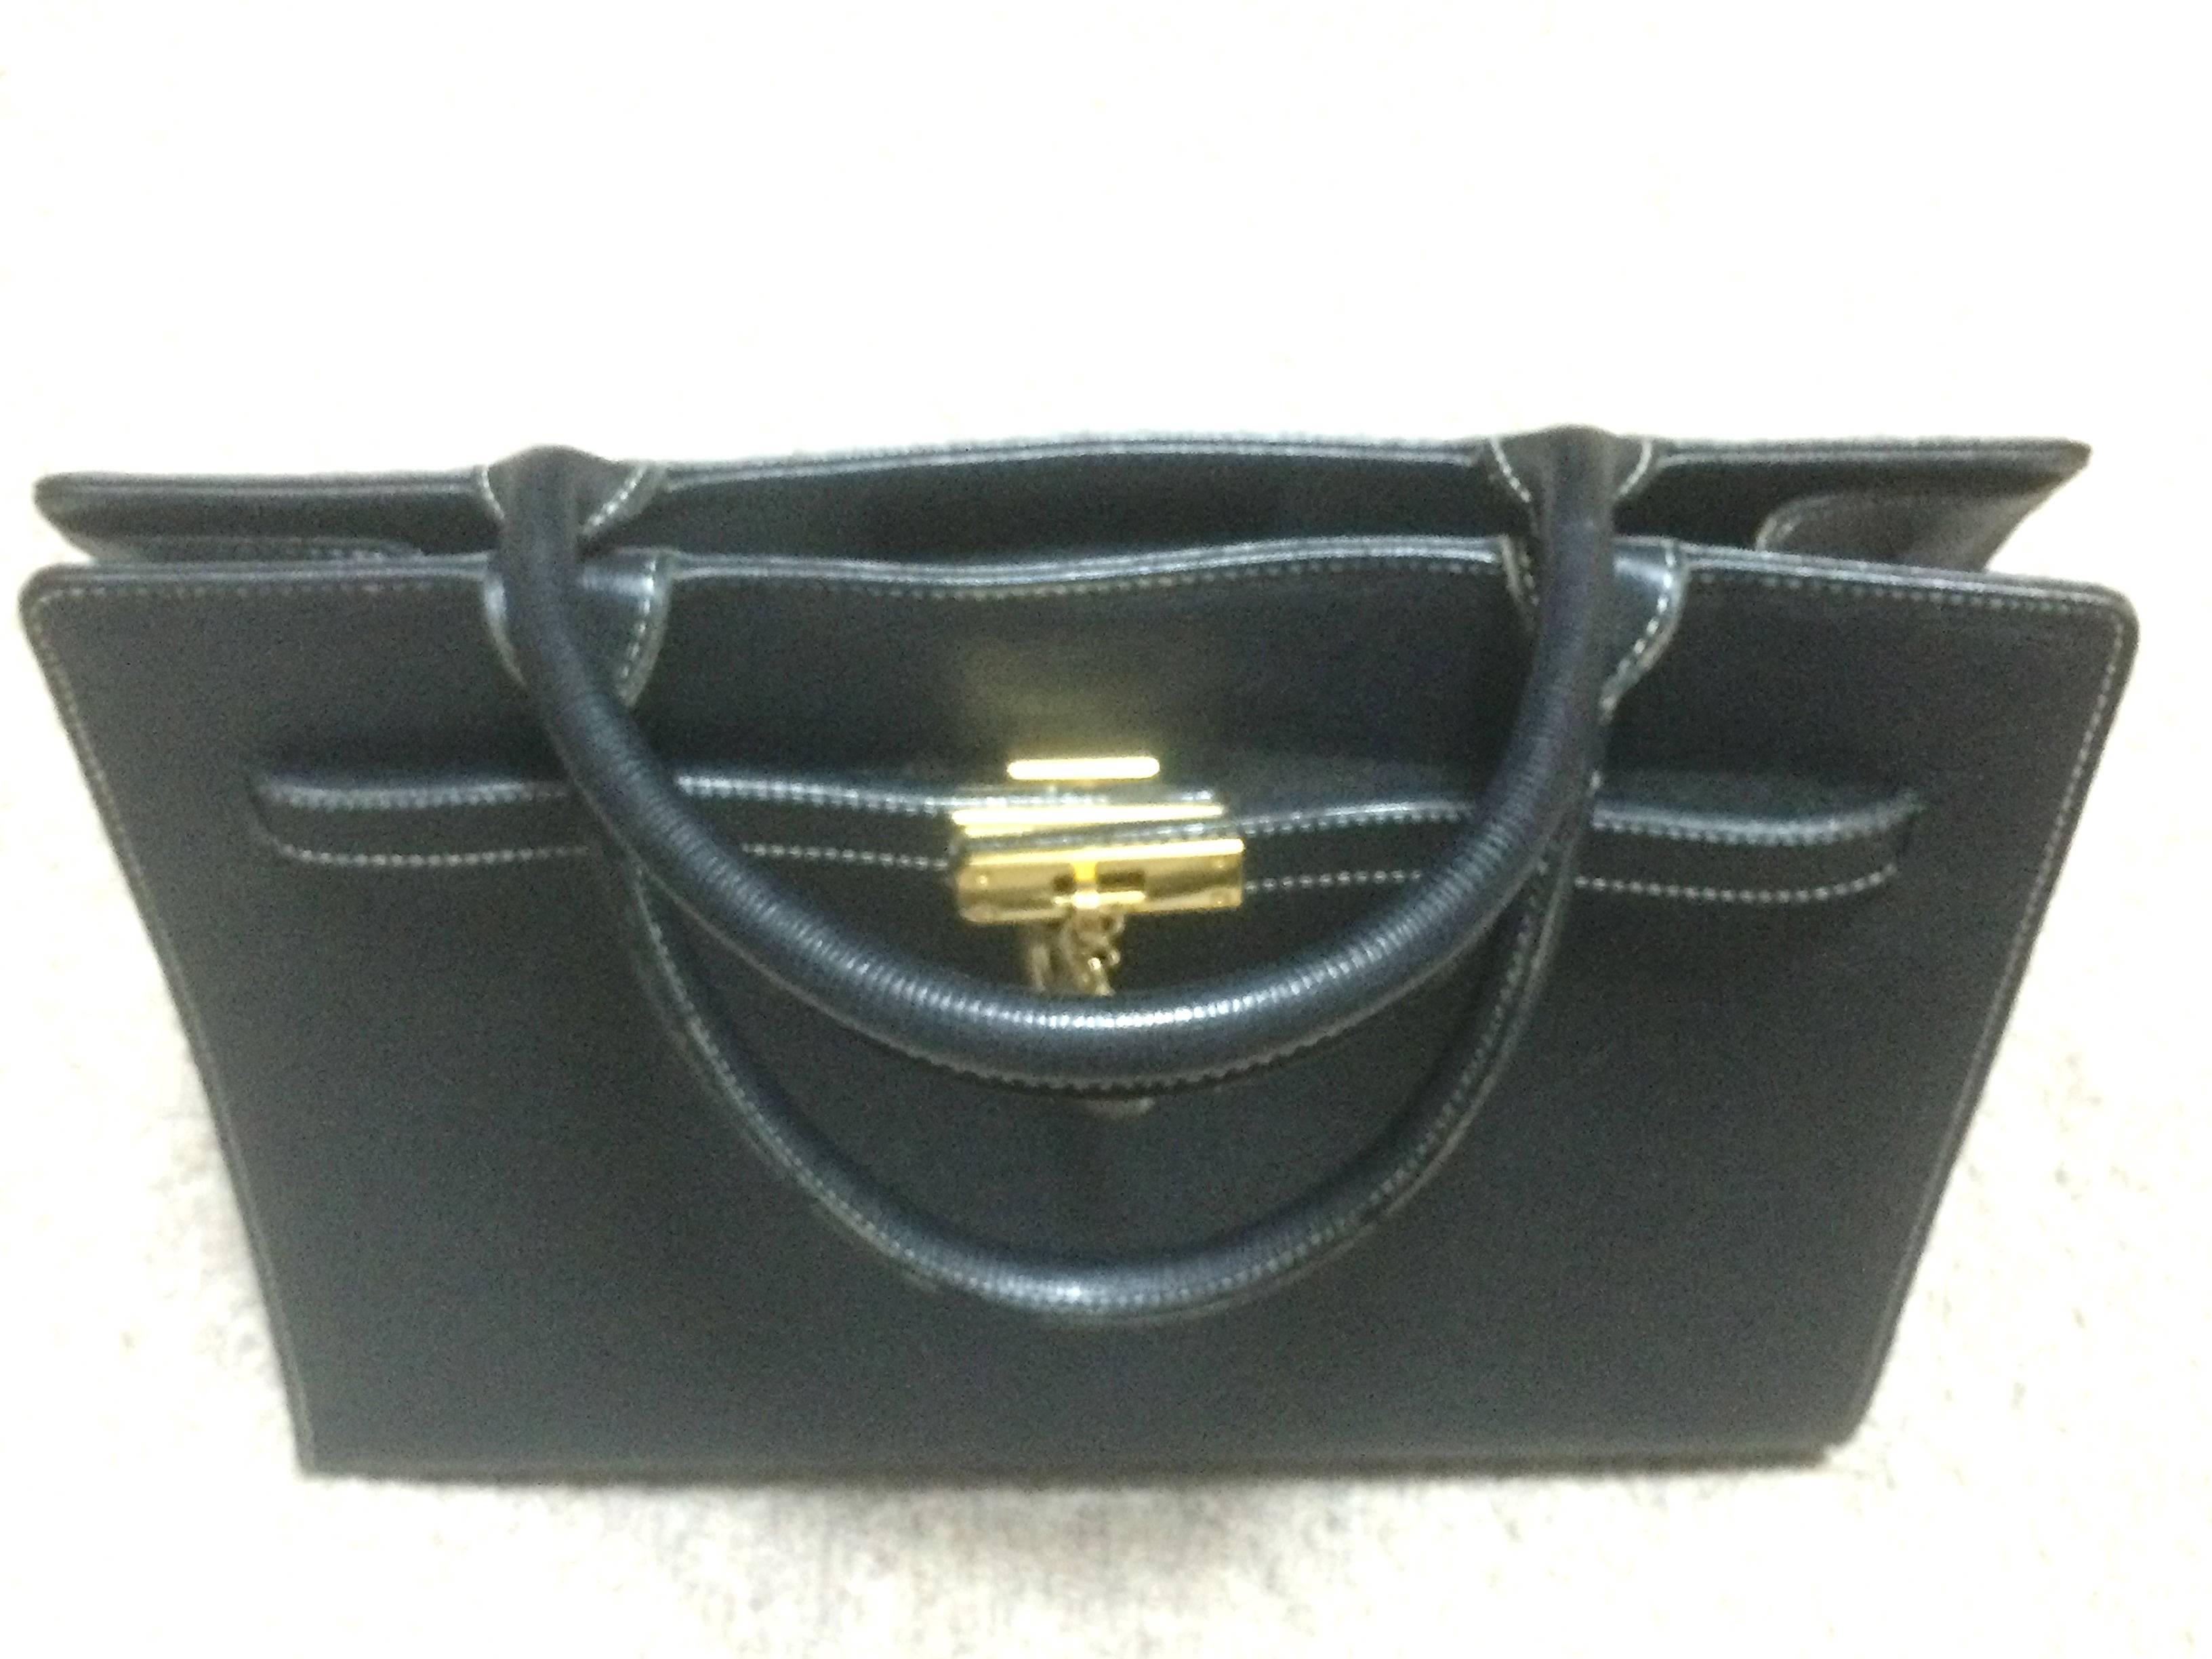 Vintage MOSCHINO black leather tote bag in Kelly purse style with iconic M charm For Sale 1